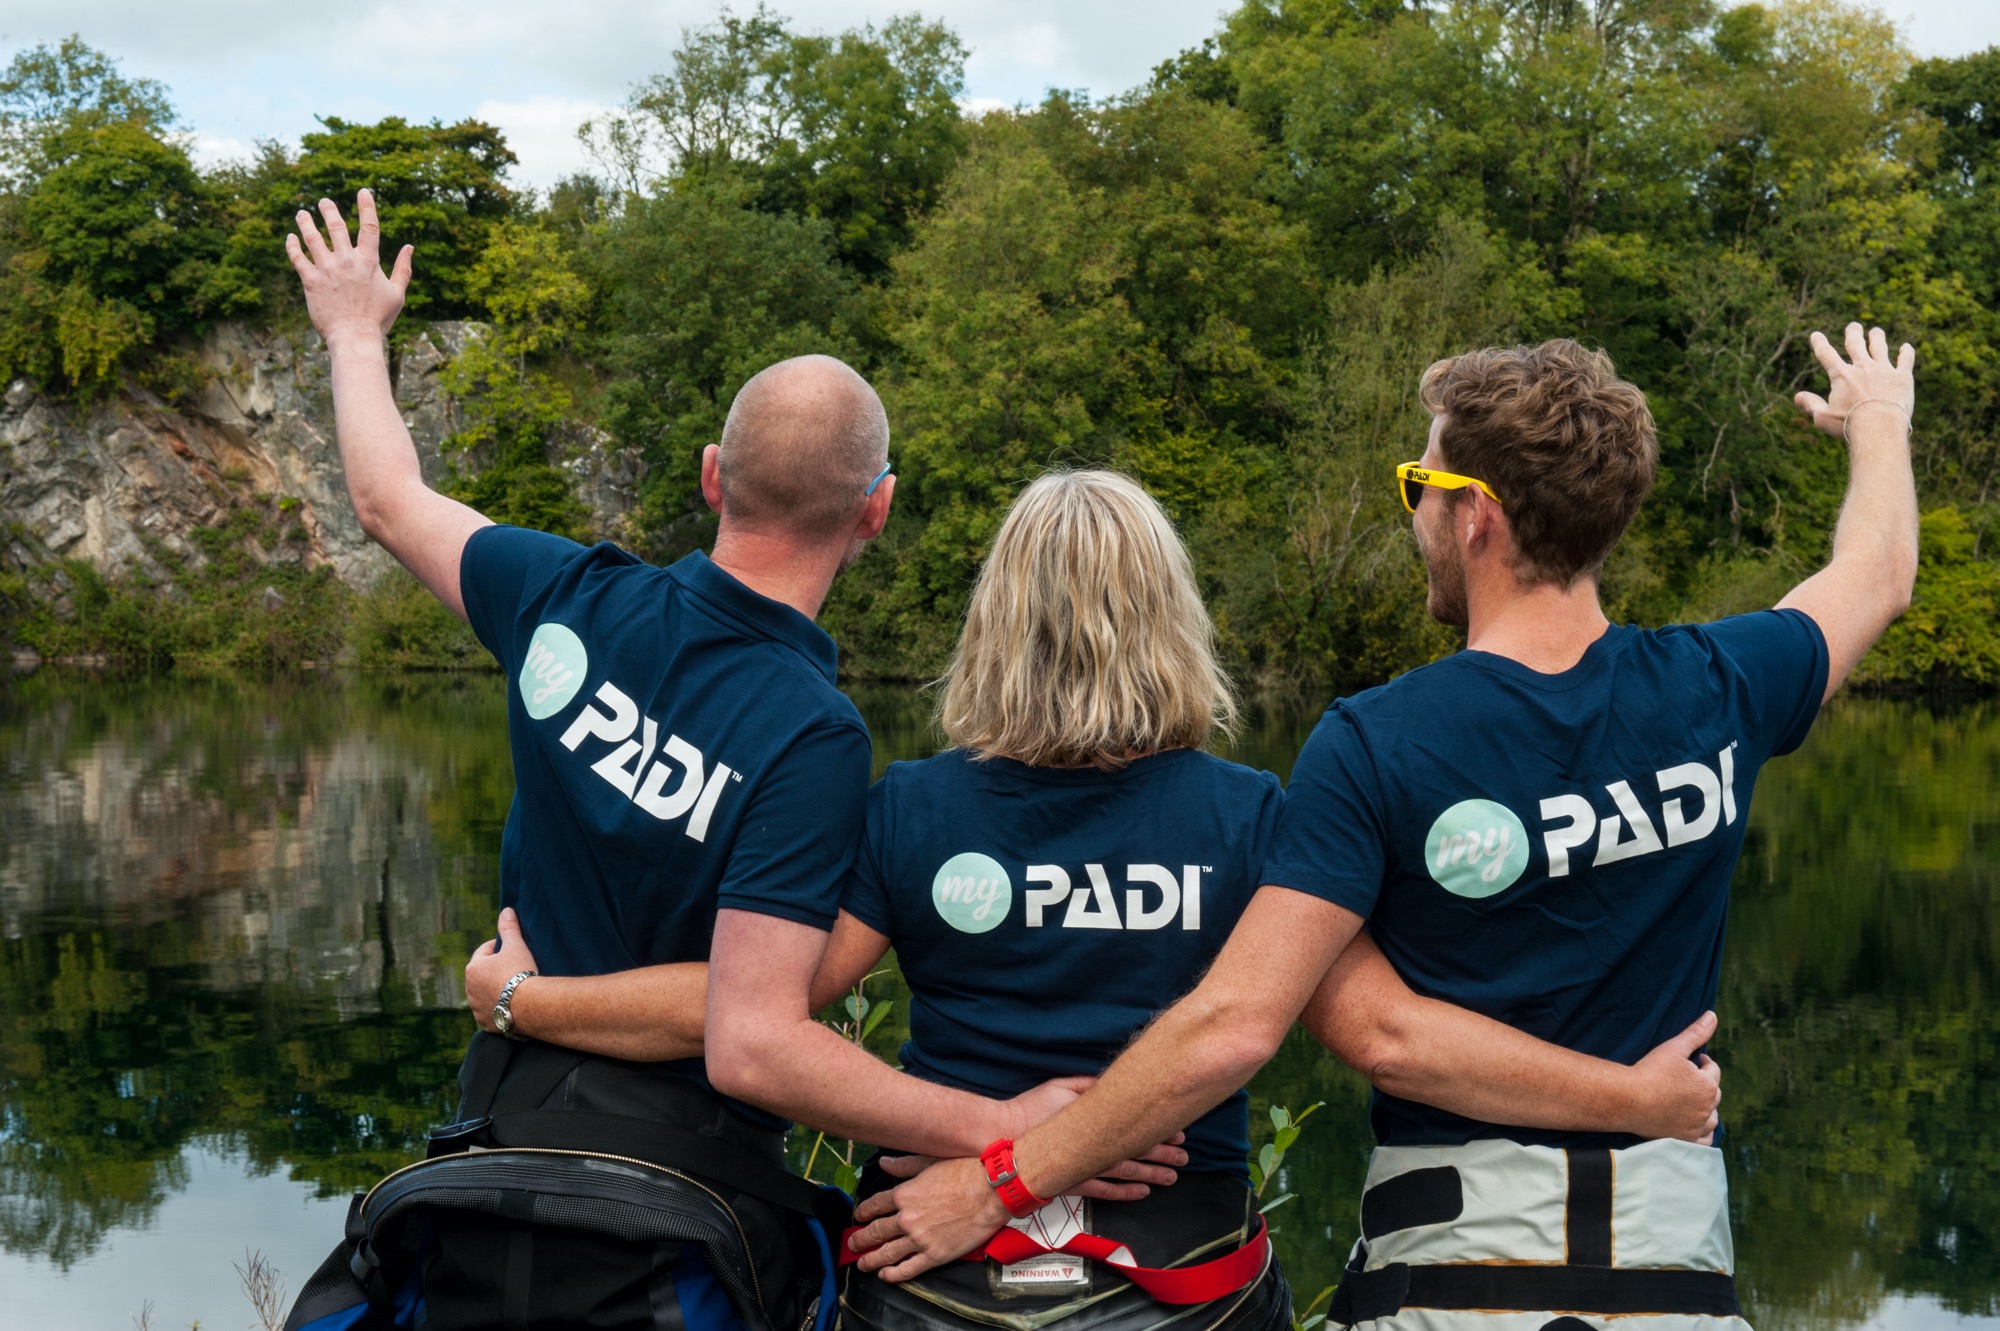 Three scuba diver friends standing next to an inland dive site, celebrating and cheering as they learn to dive in the UK